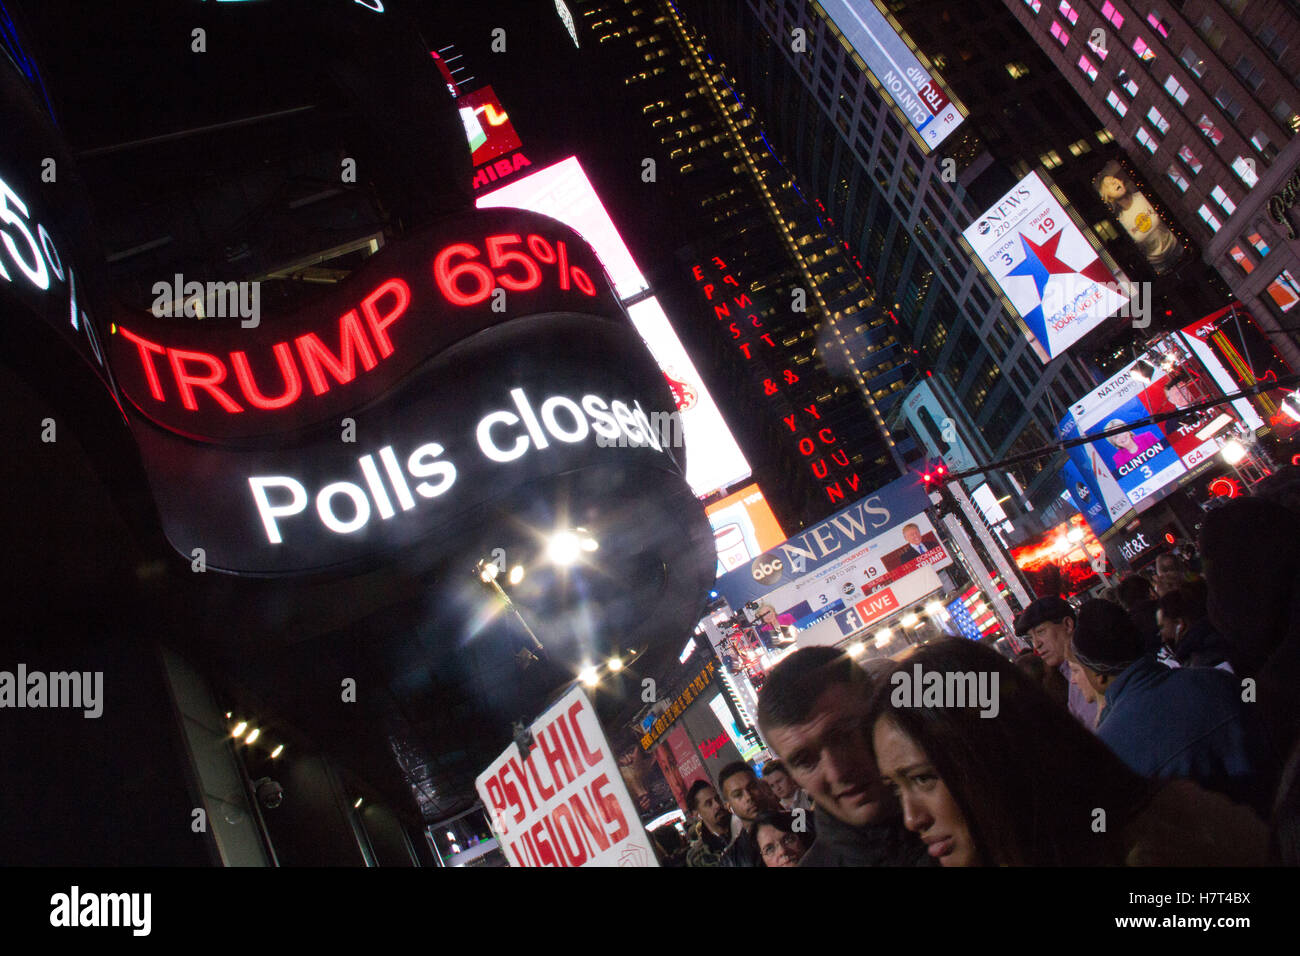 New York, USA 8th Nov, 2016 Heavy foot traffic in Times Square as crowd watching election results come in grows on Tuesday, Novmeber 8, 2016 Credit: © Michael Candelori/Alamy Live News  Stock Photo